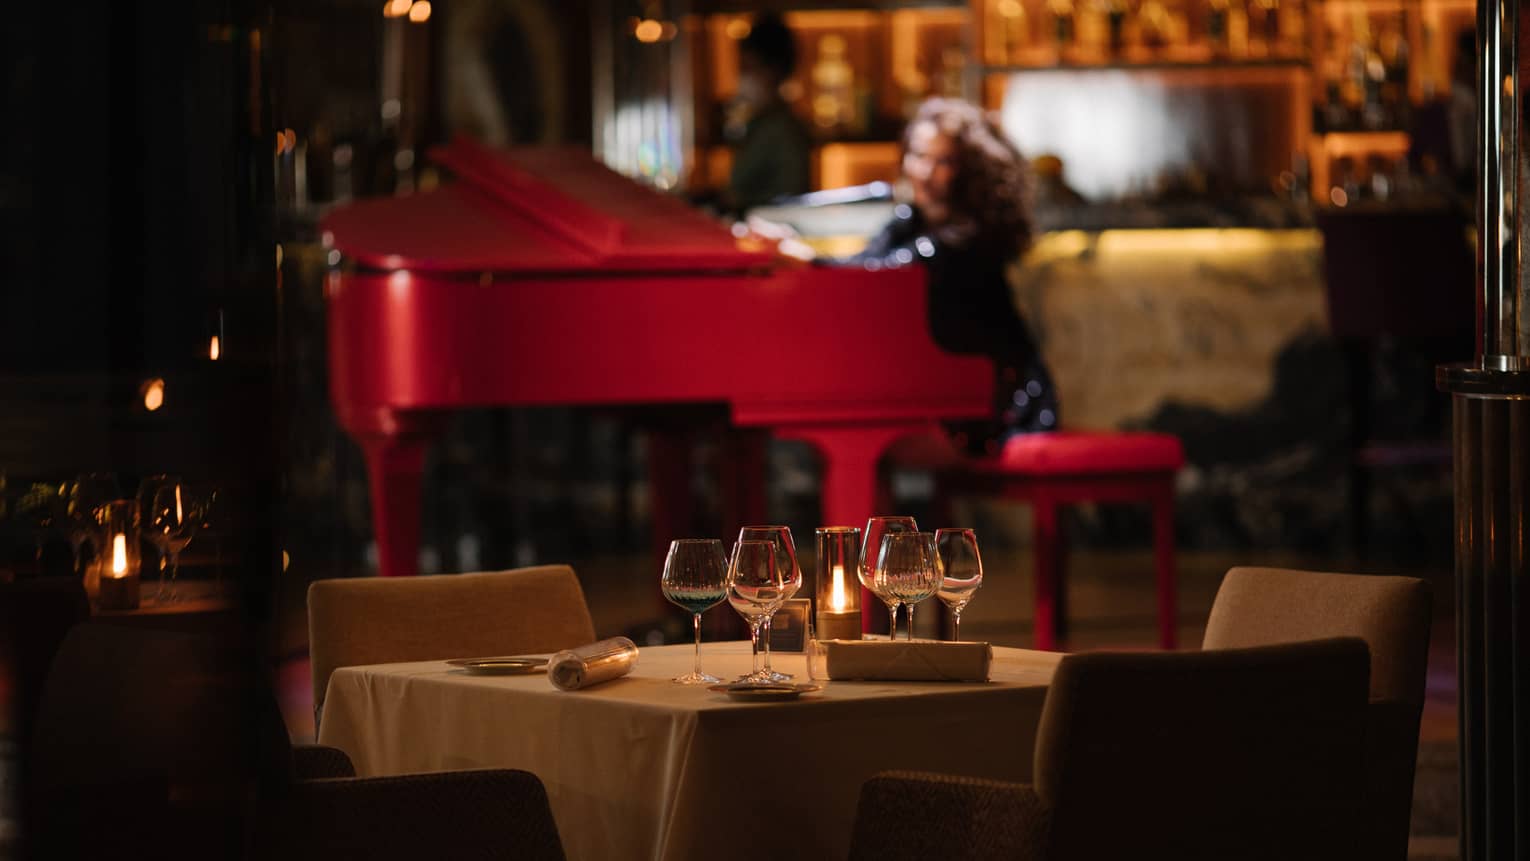 Pianist at red baby grand in backdrop of dimly lit restaurant lounge